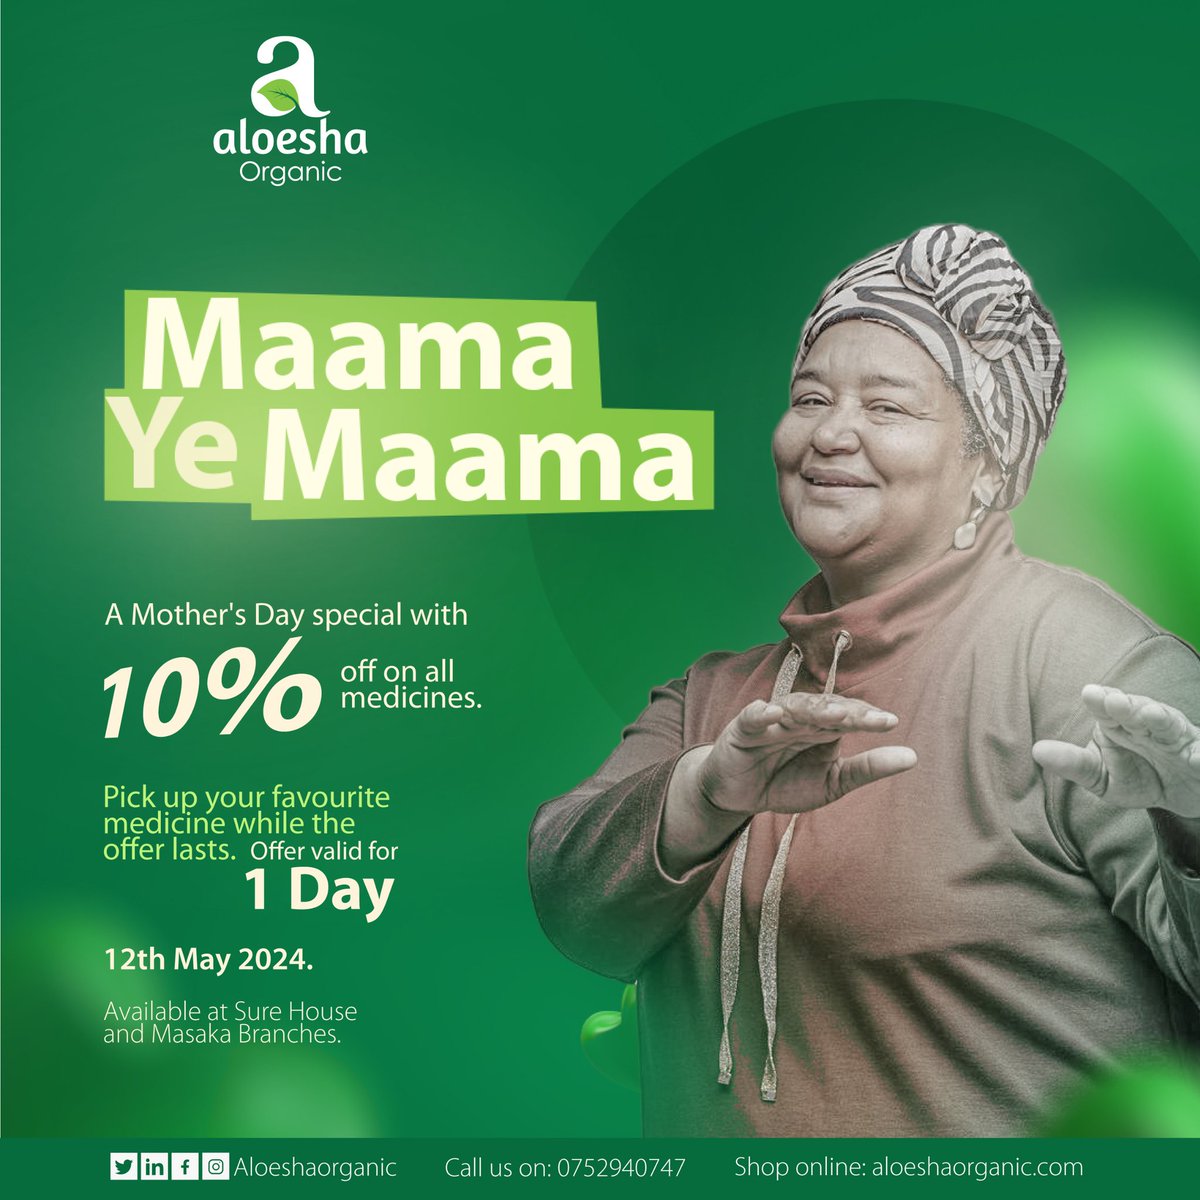 Good morning. We have a Mother's Day special planned for tomorrow. It's a discount on all medicines. Take advantage while the offer lasts. 🤗 #herbalife